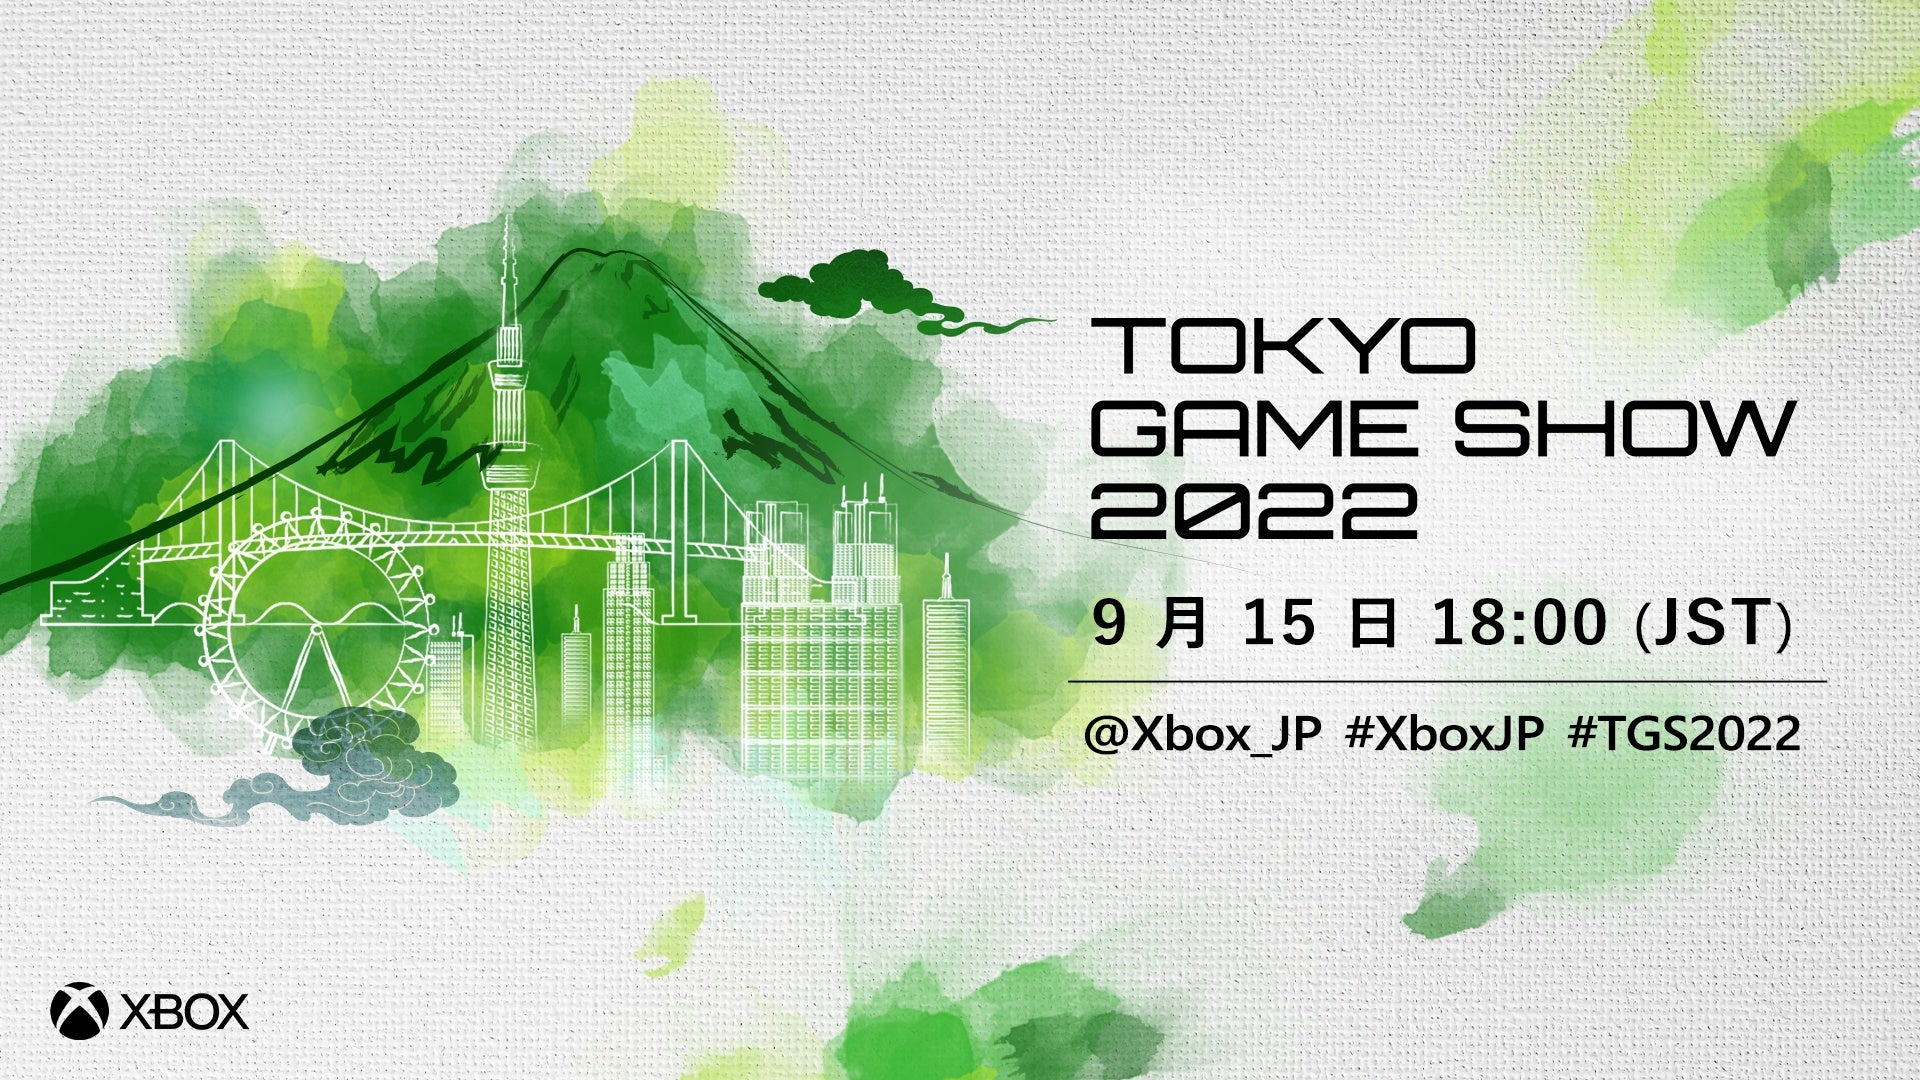 Xbox will return to the Tokyo Game Show 2022